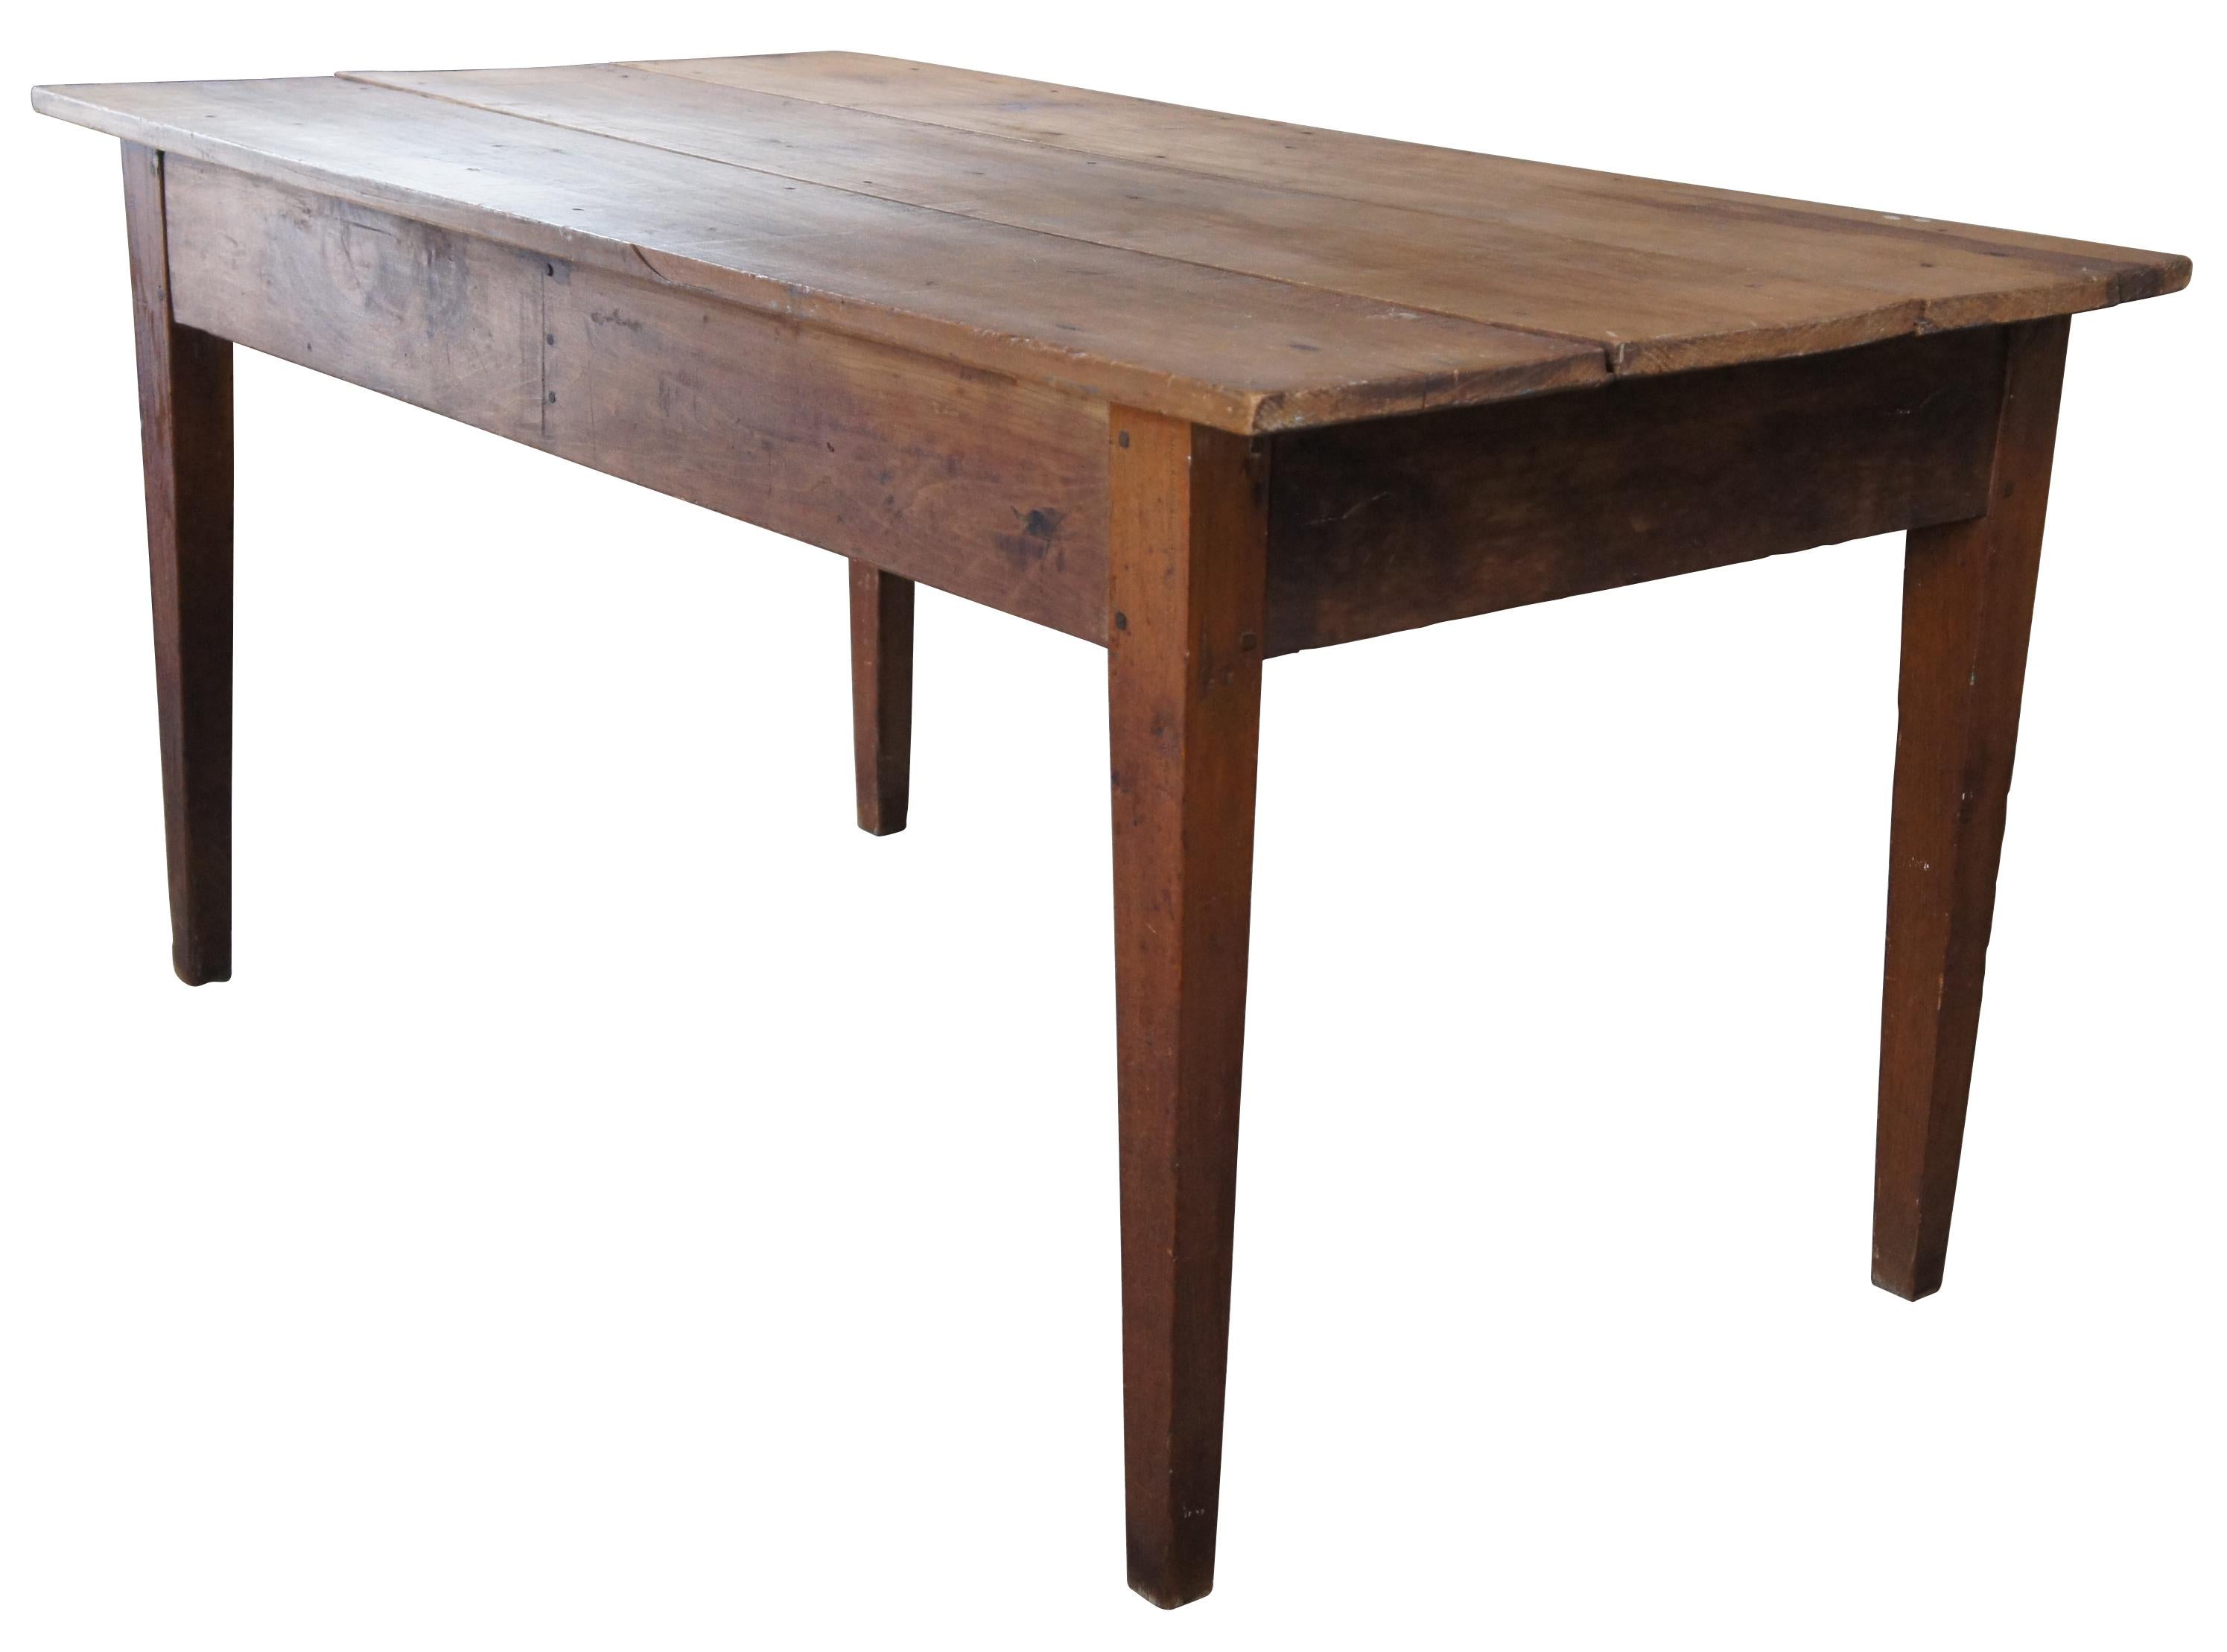 Antique primitive Tennessee farm house breakfast / dining table or desk. Made of pine planks featuring rectangular form with a three plank top and square tapered legs.